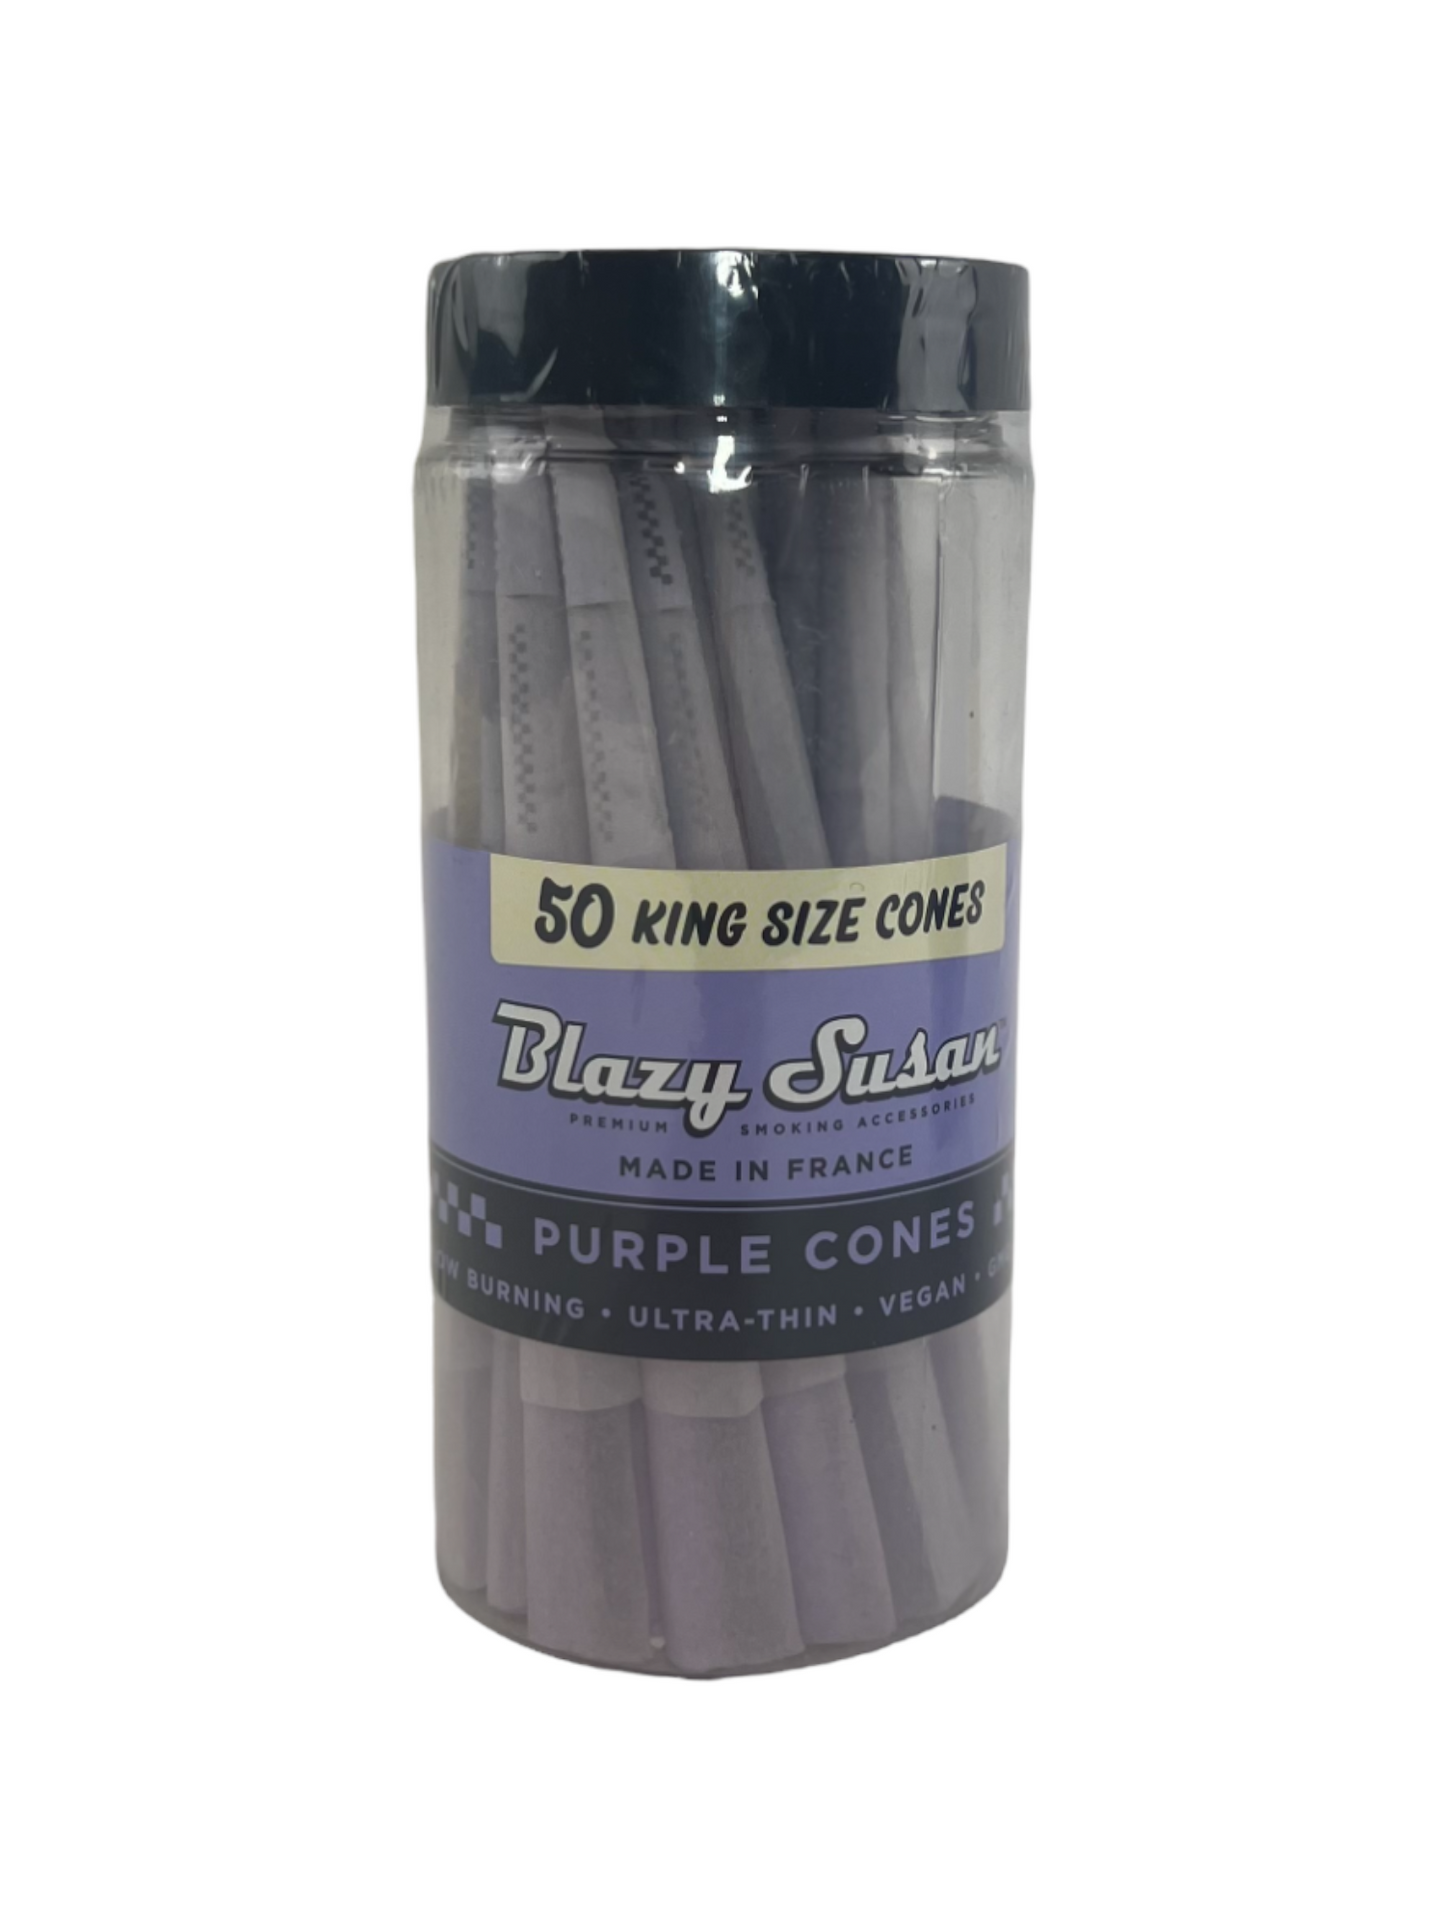 Blazy Susan Purple Pre-Rolled Cones | 50 Pack King Size